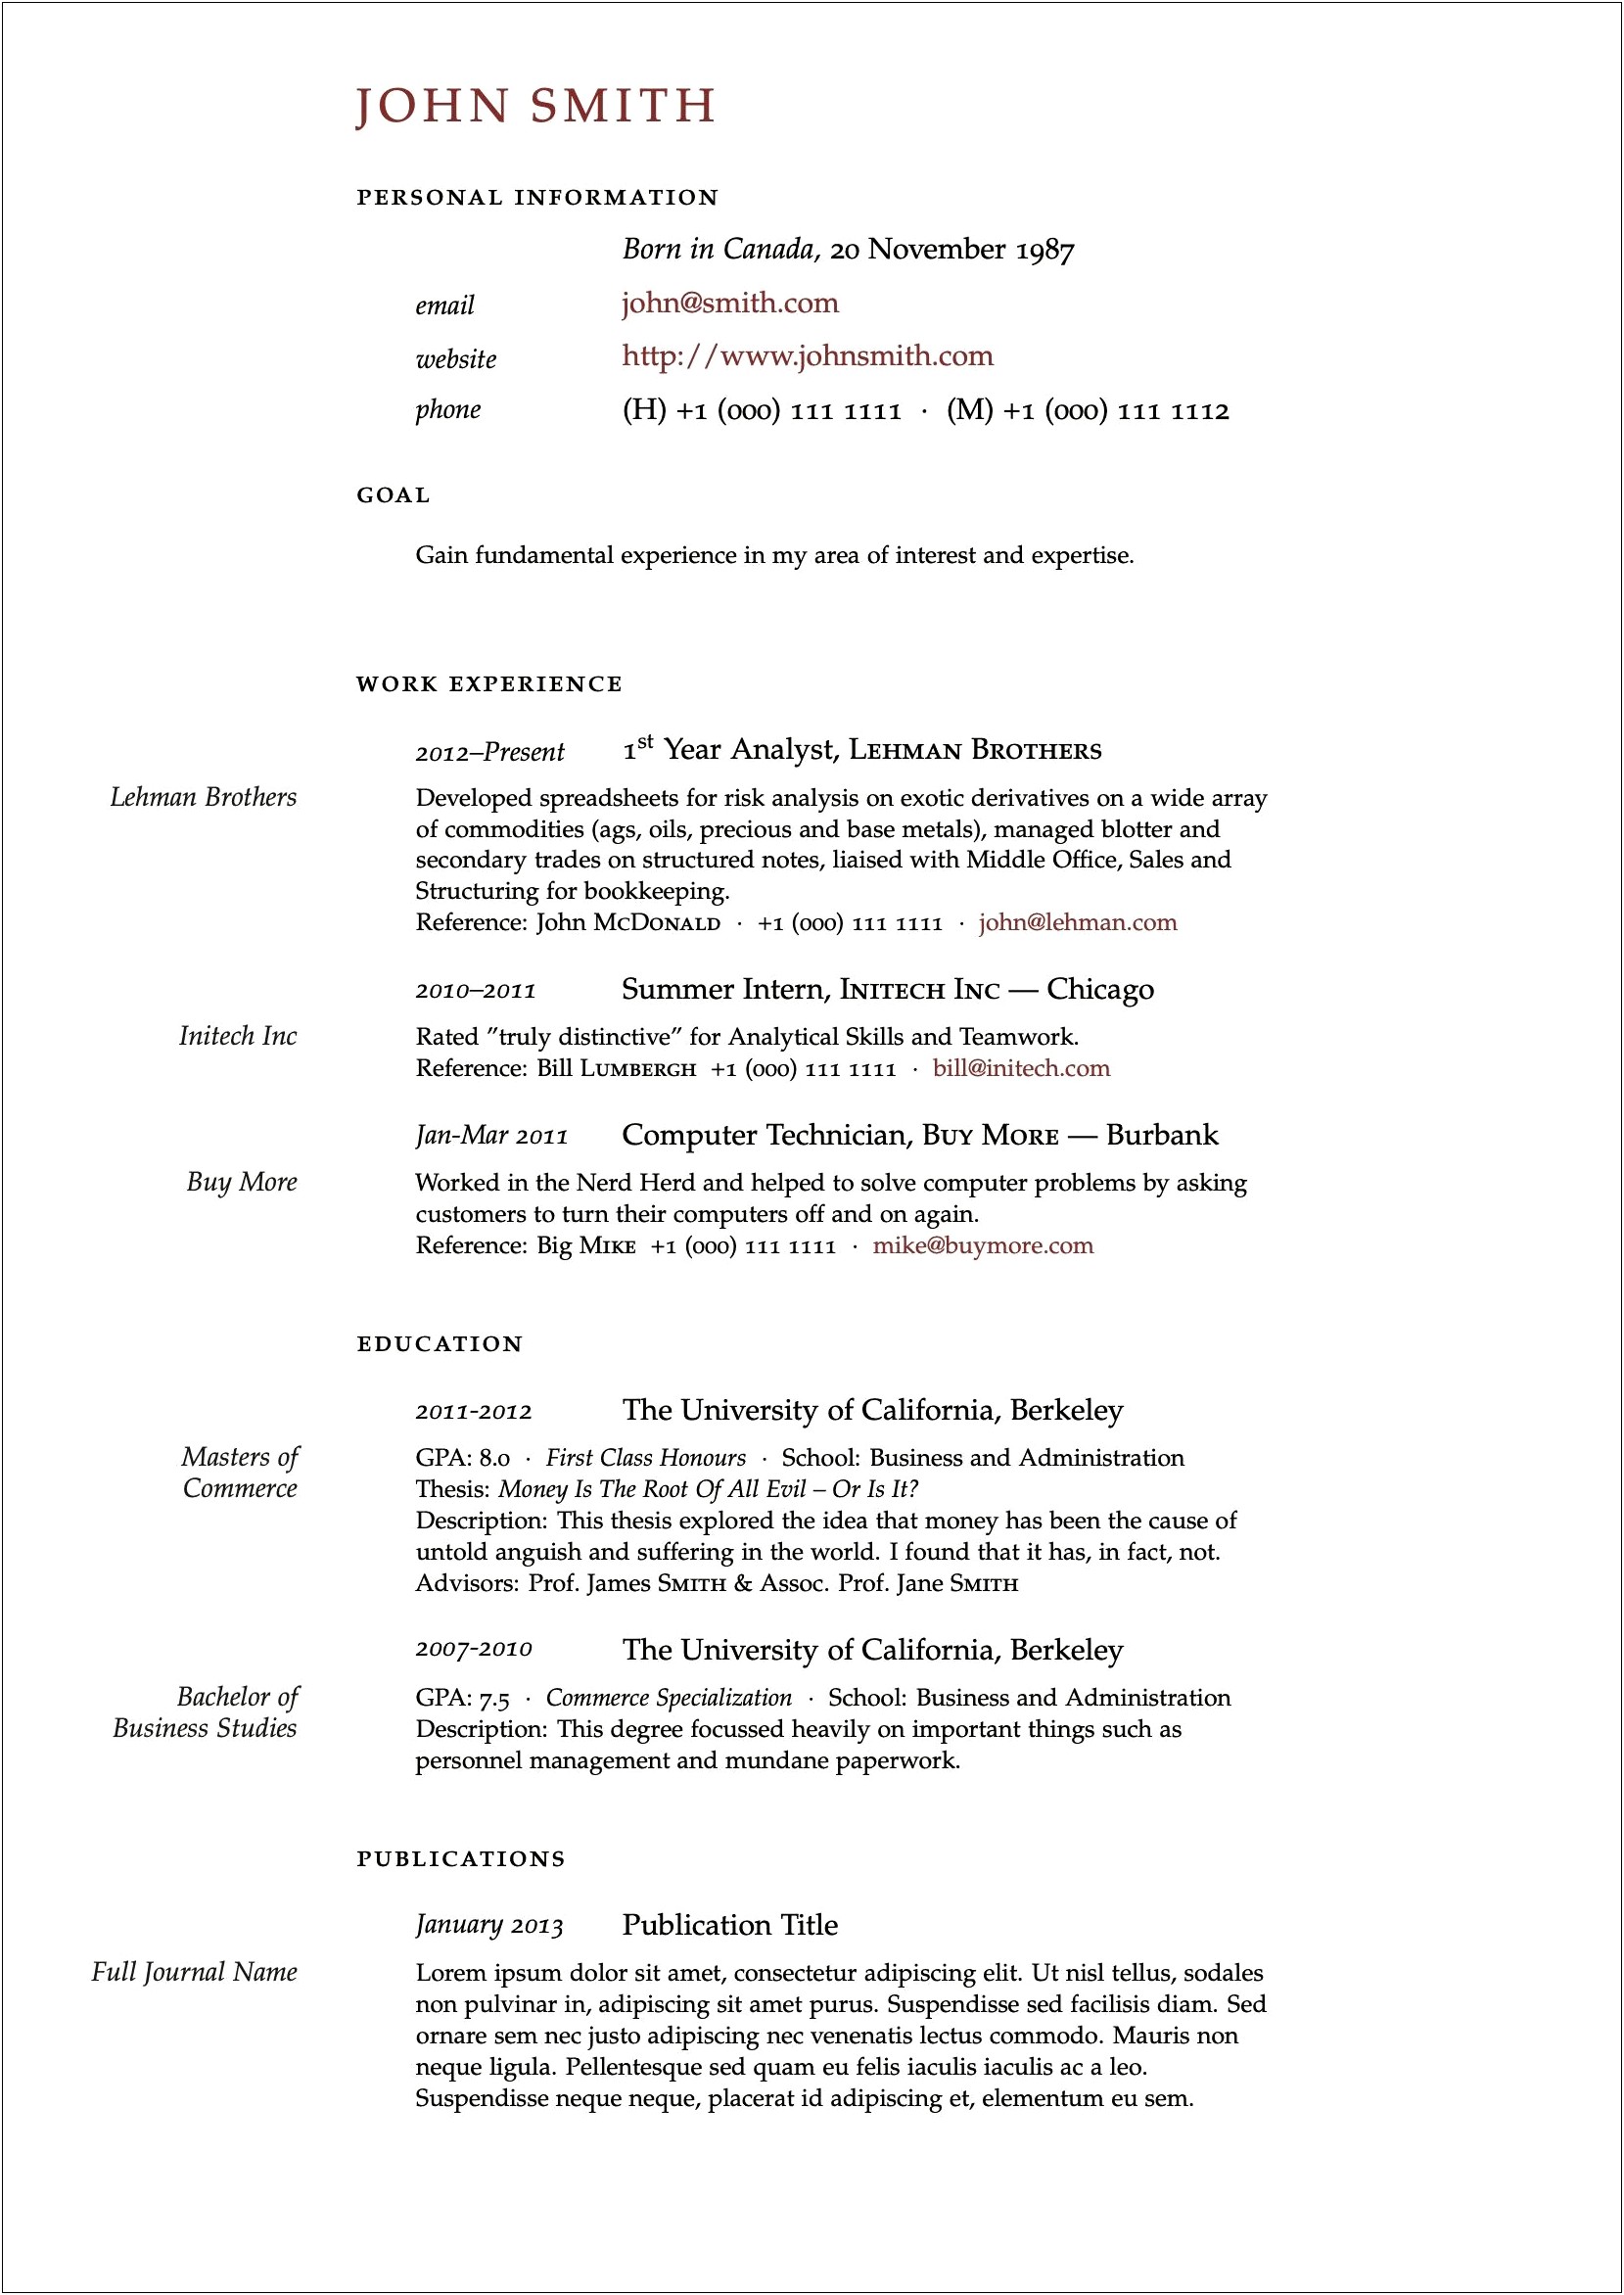 Lisiting Awards And Honors In Law School Resume